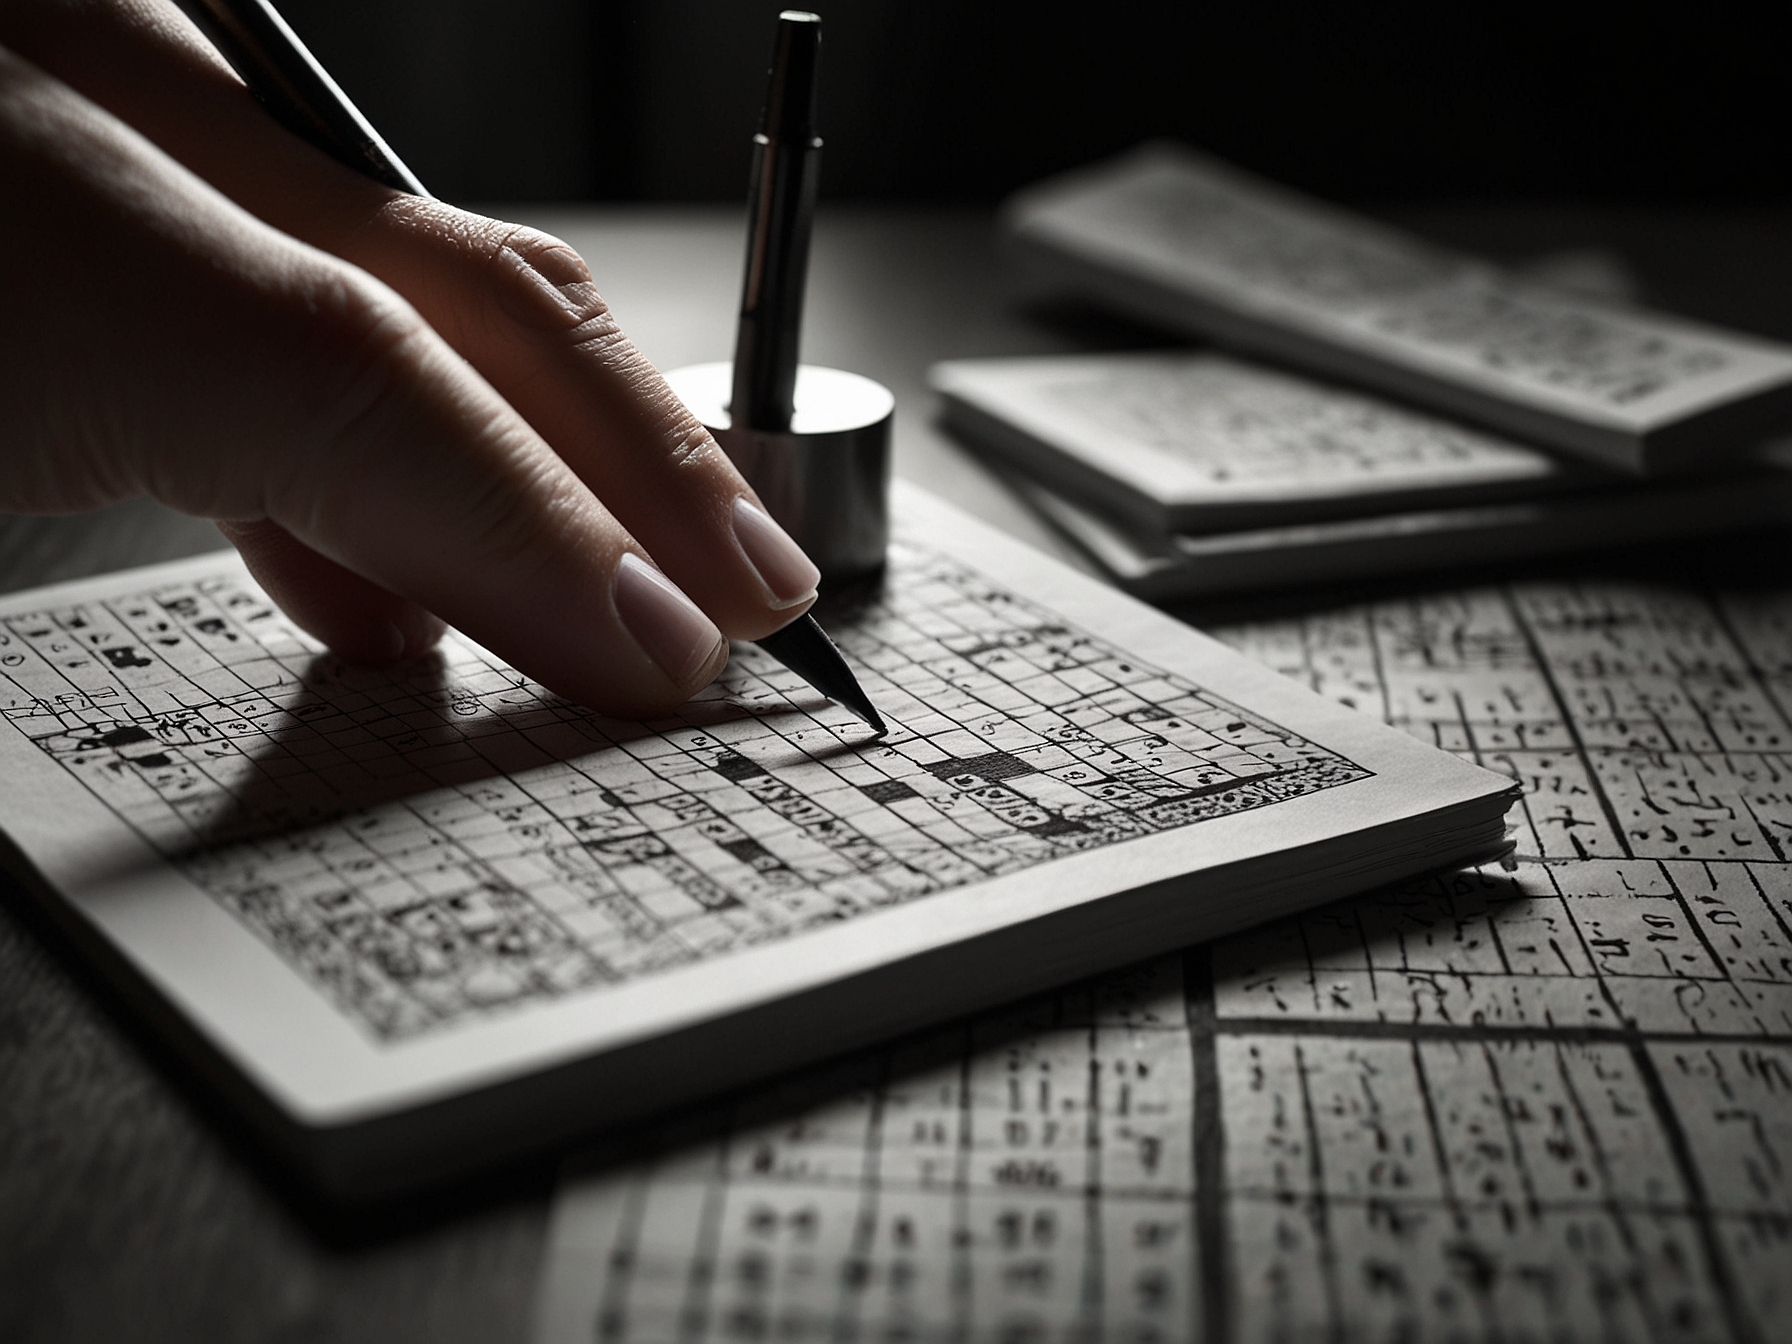 A person solving the NYT Mini Crossword puzzle on a Sunday morning, with a pen and notebook beside, illustrating focused engagement with the challenging clues and grid.